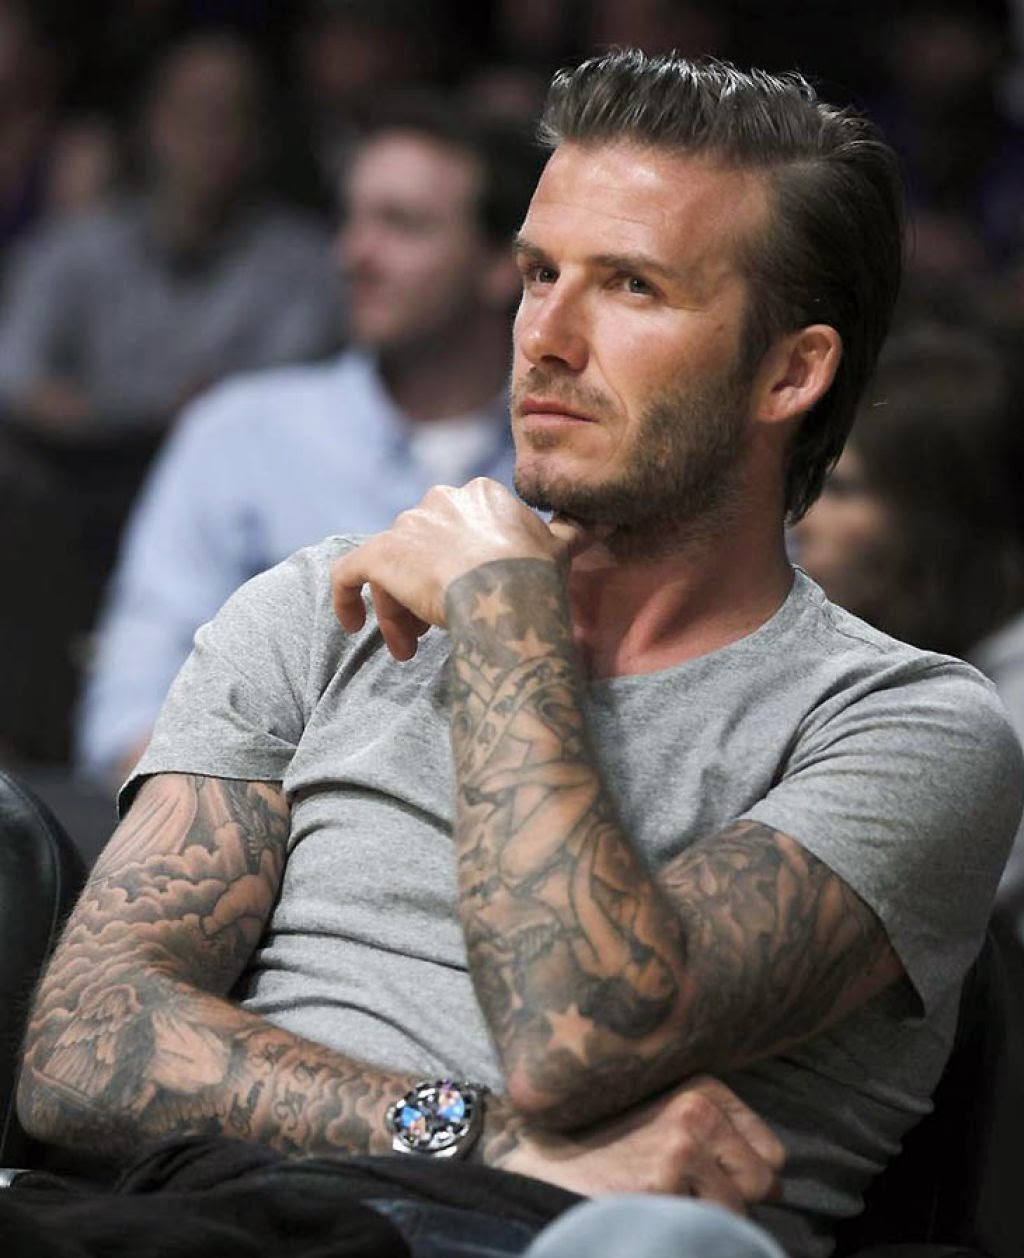 David Beckham - "I definitely want Brooklyn to be christened, but I don't know into what religion yet."